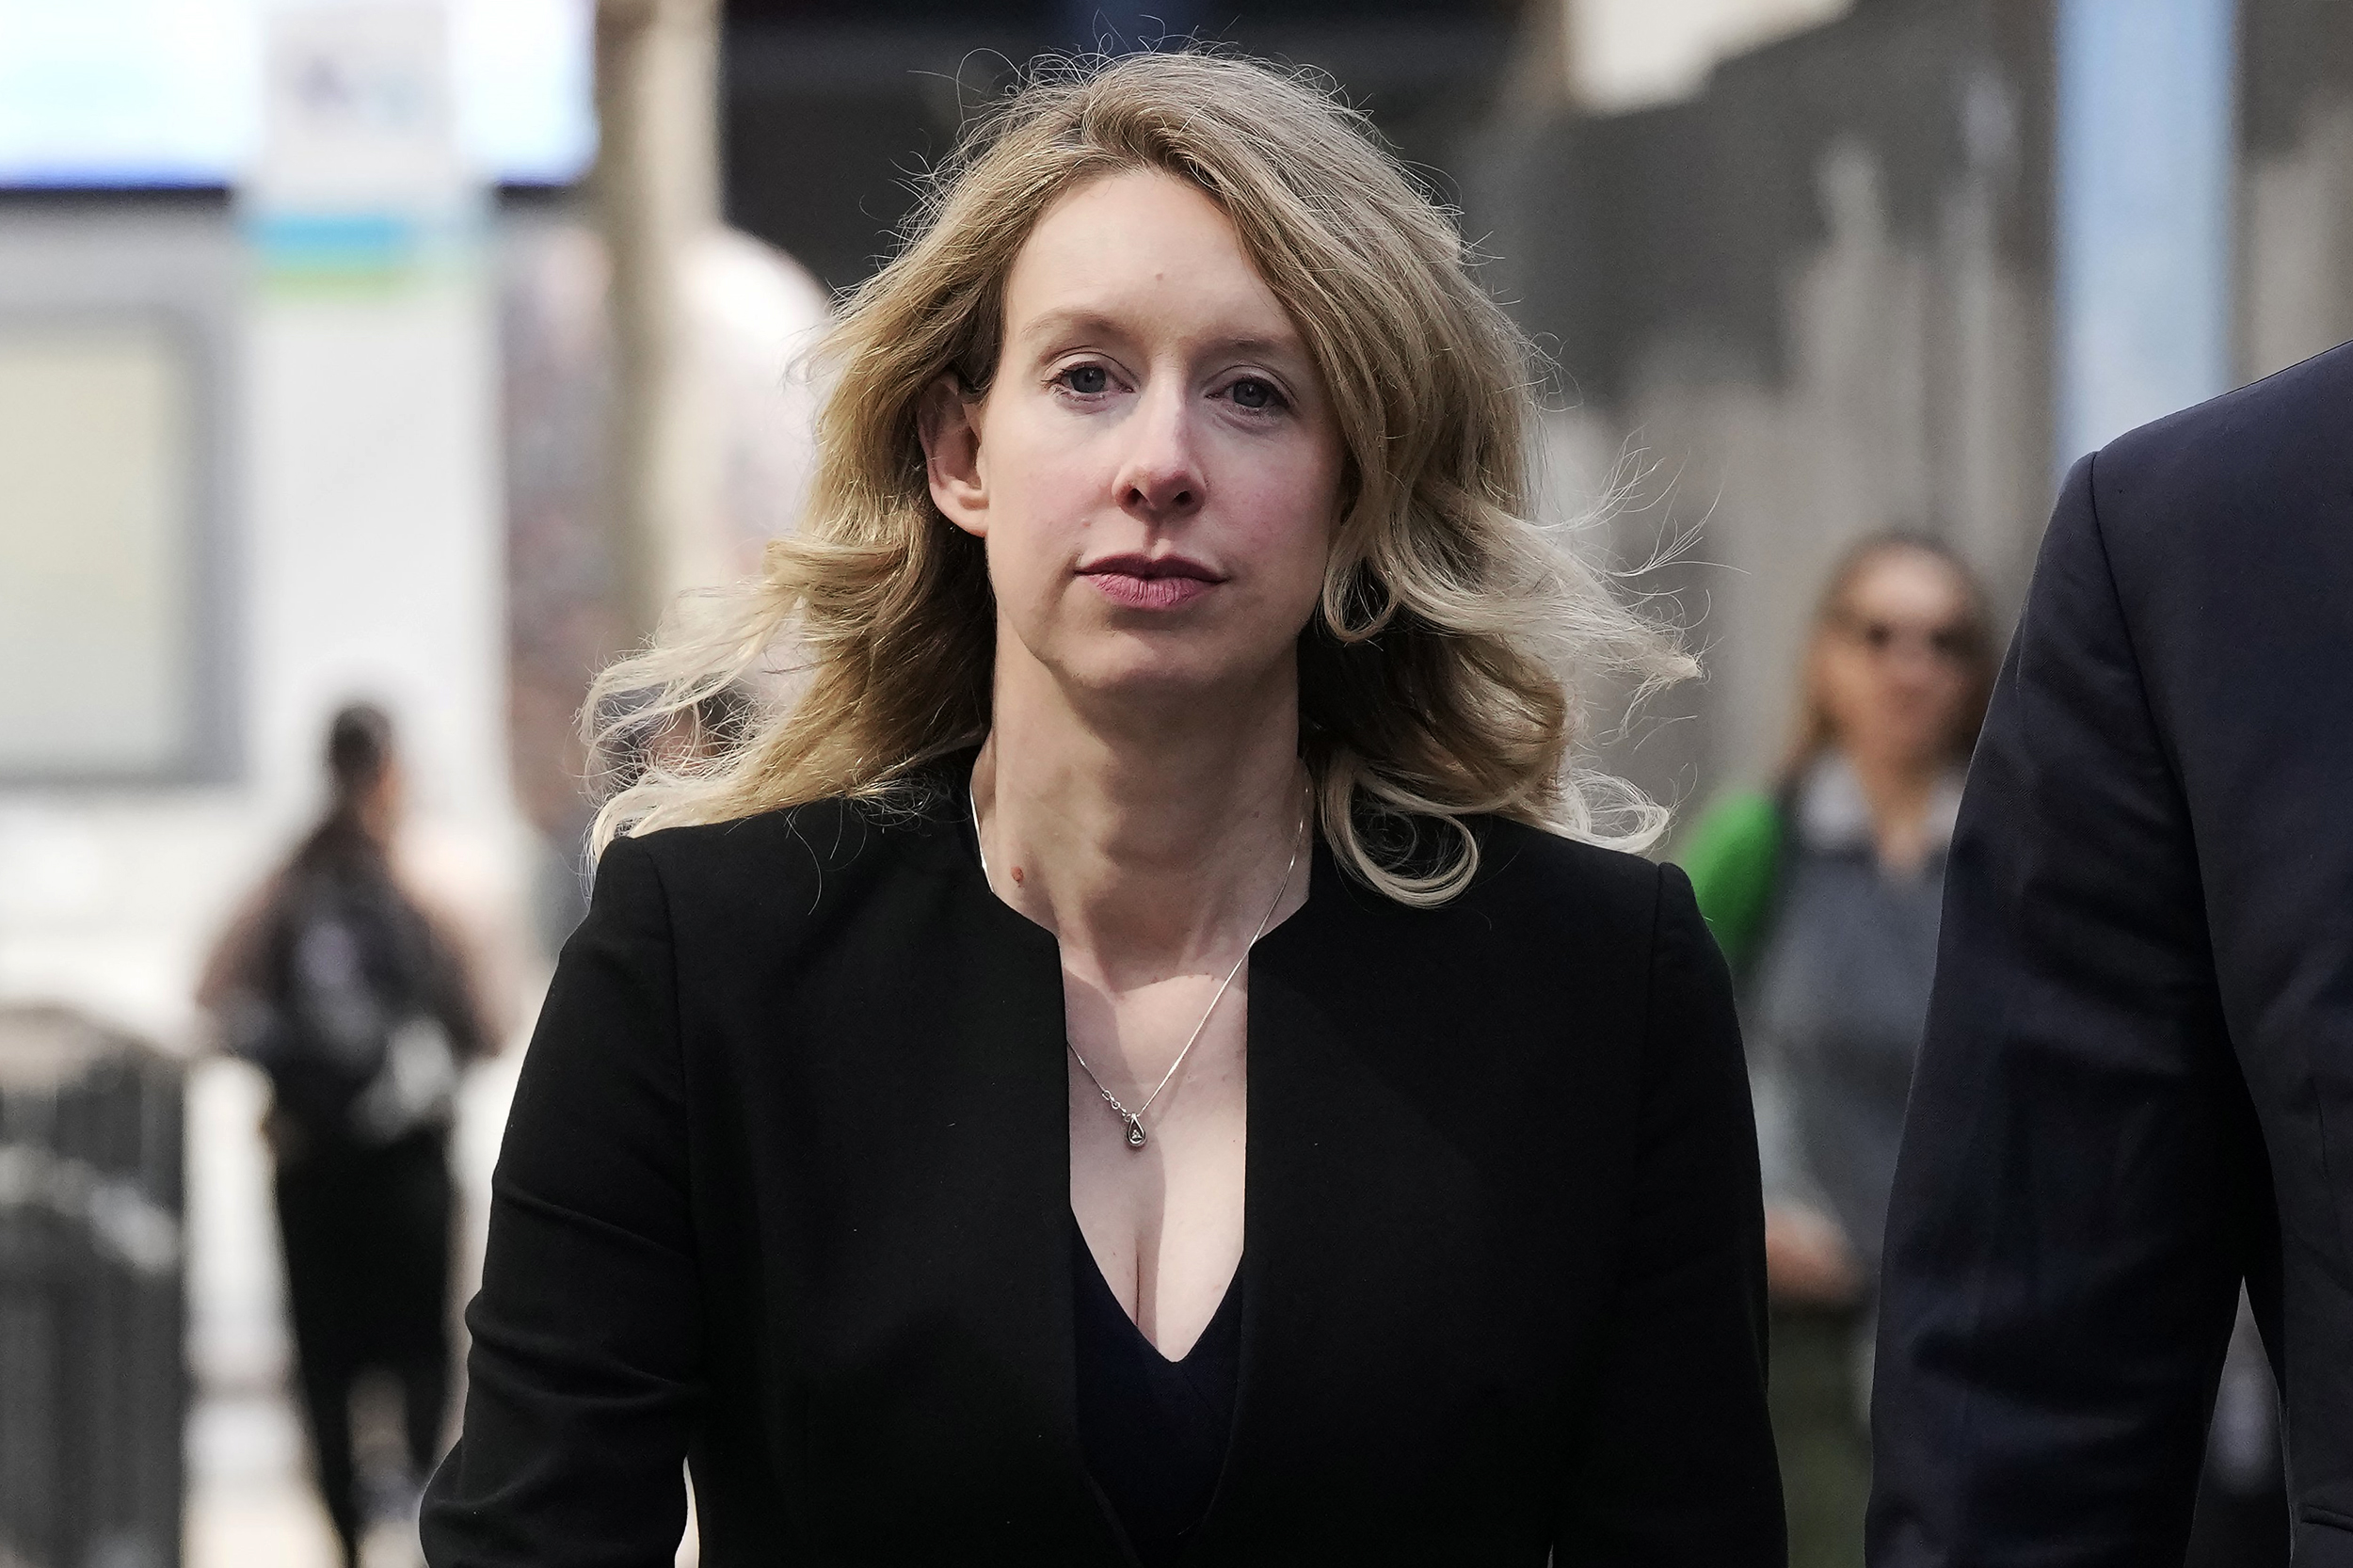 The disgraced Theranos founder, Elizabeth Holmes will remain a little free longer as she has delayed the start of her 11-year prison sentence after lodging apppeal